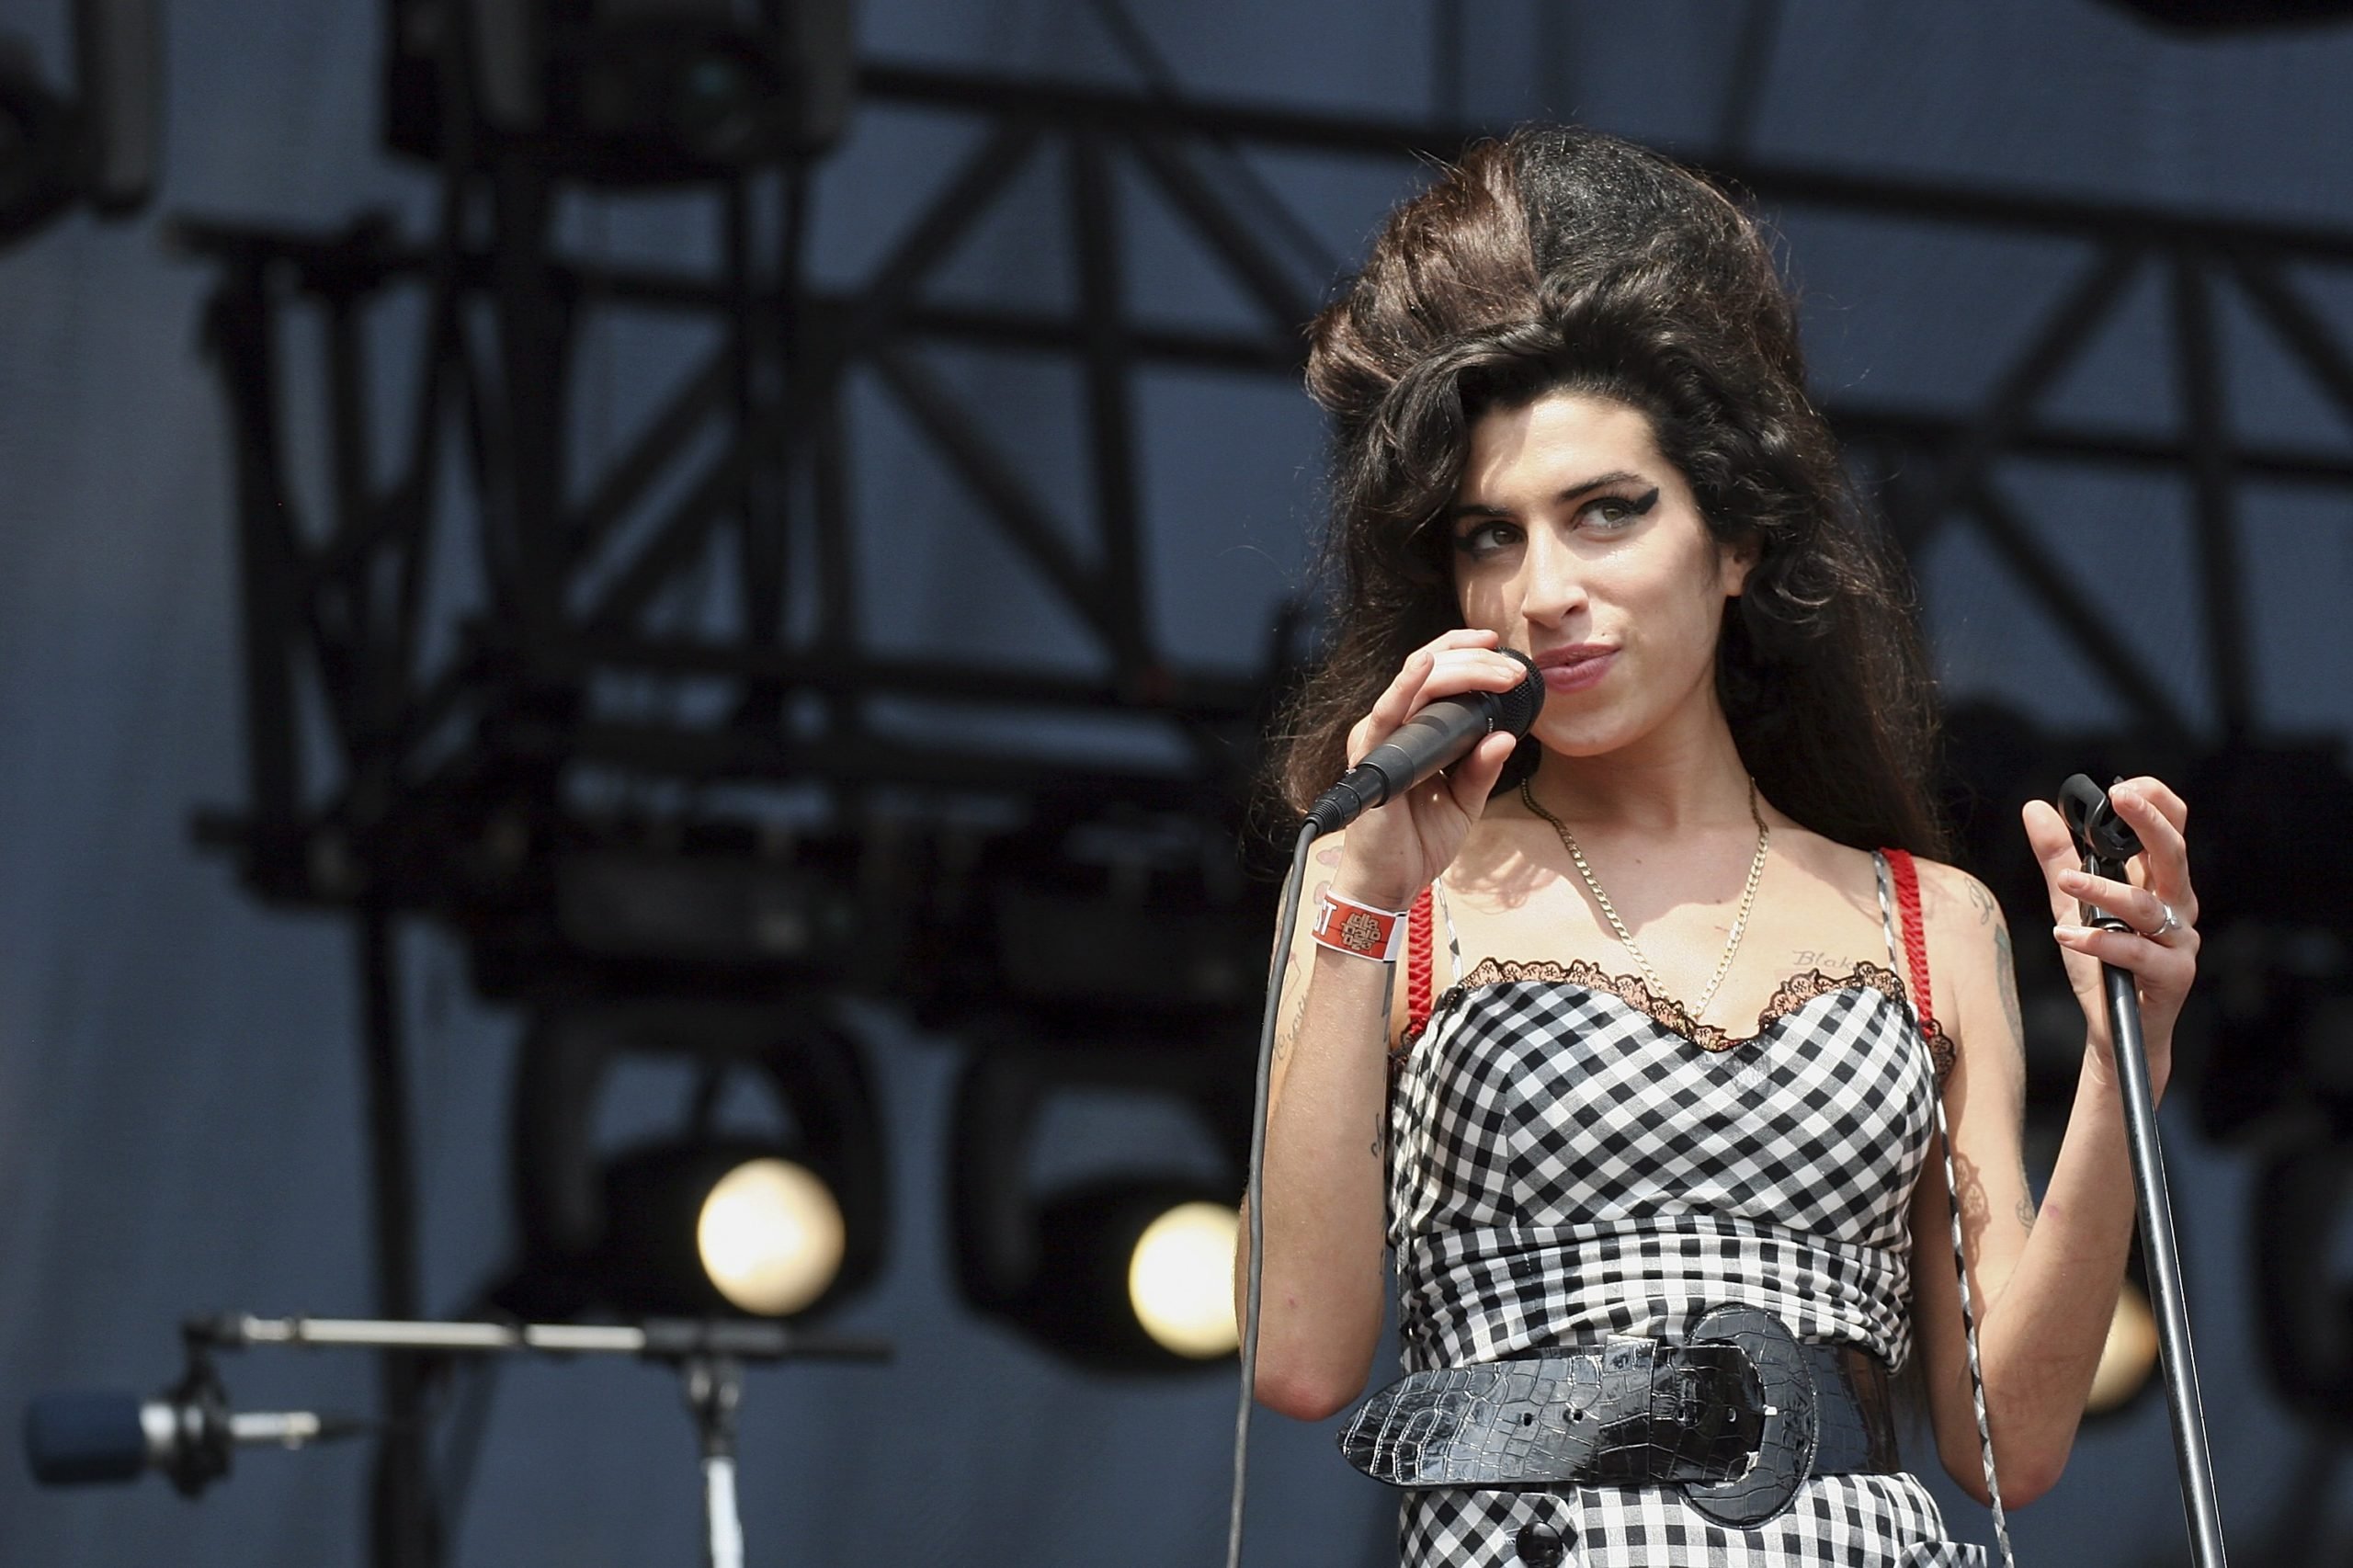 FACT CHECK: Is This an Authentic Mugshot Of Amy Winehouse?